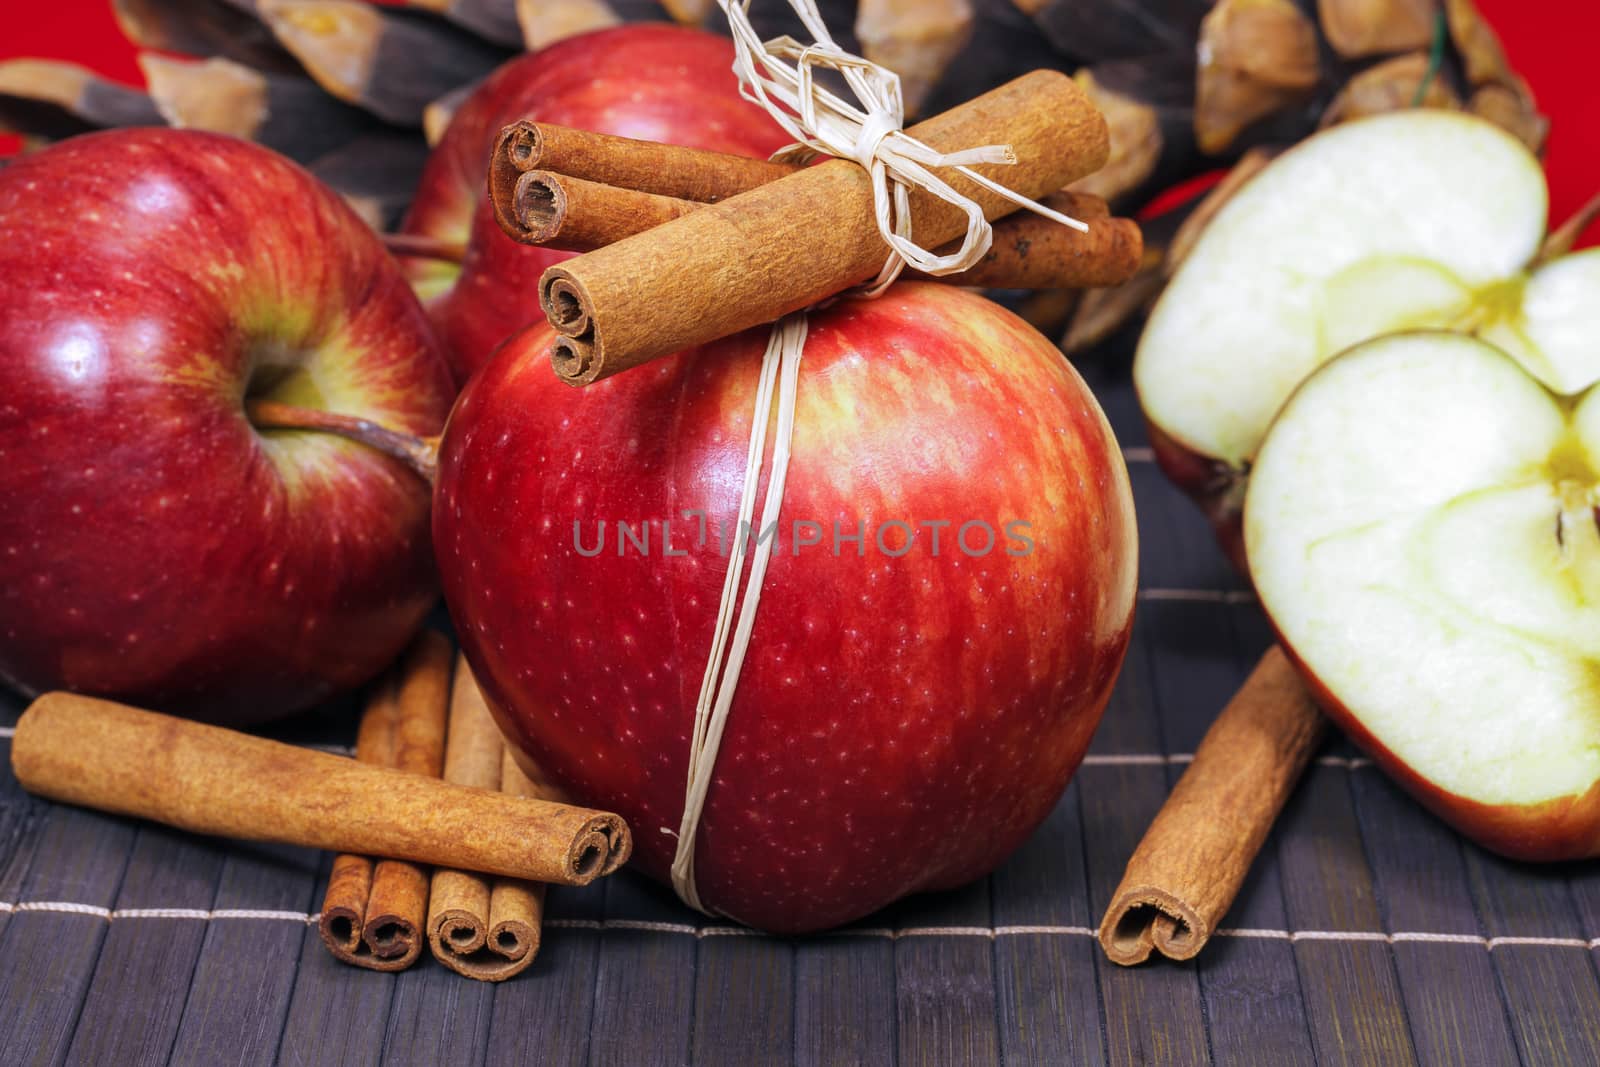 Red apples and cinnamon sticks by Slast20